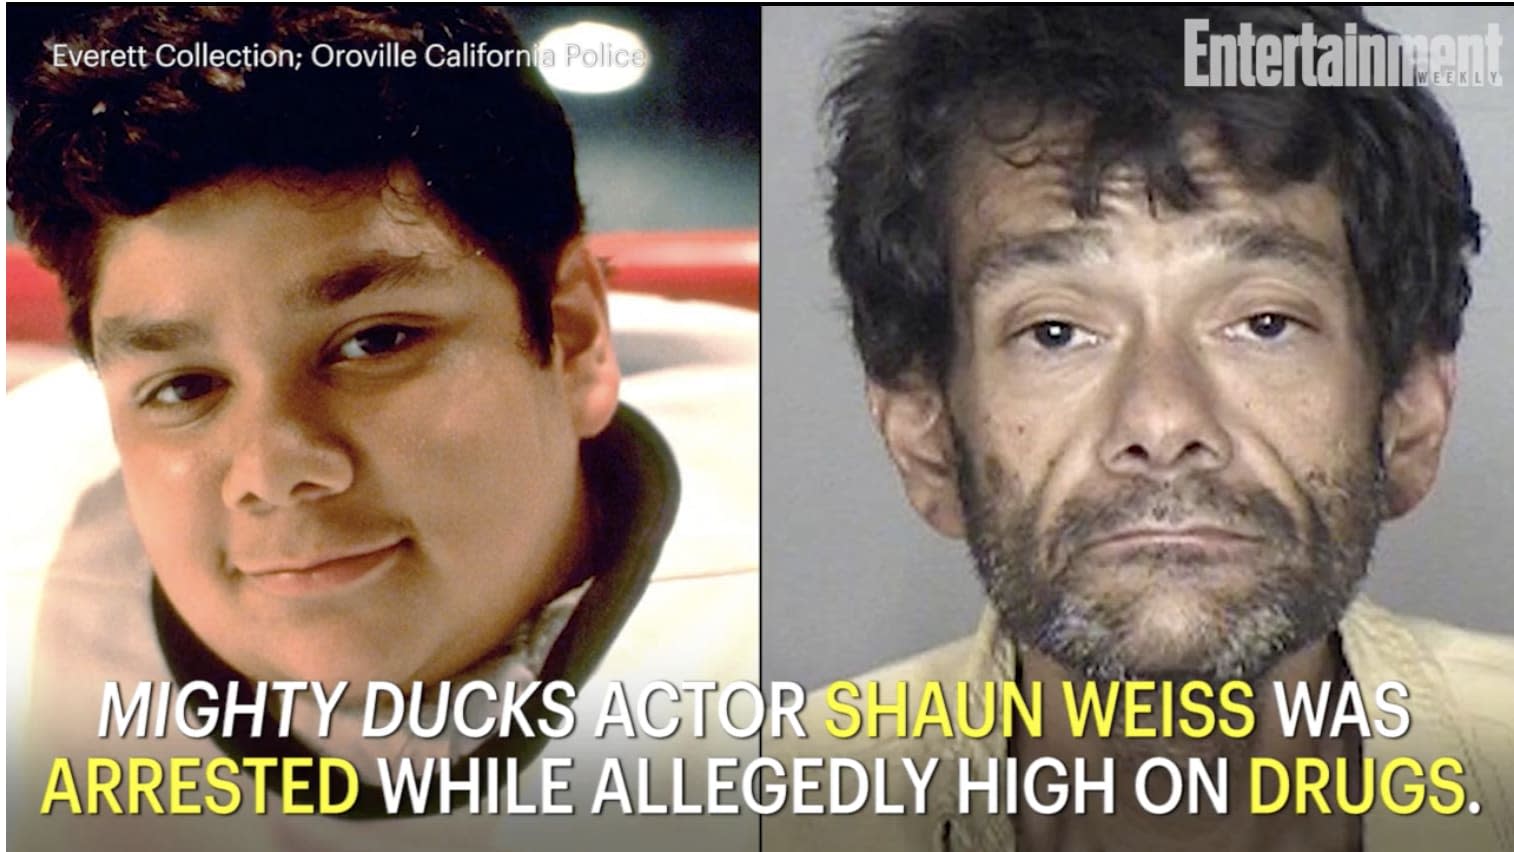 Mighty Ducks' Actor Shaun Weiss Arrested For Burglary While High